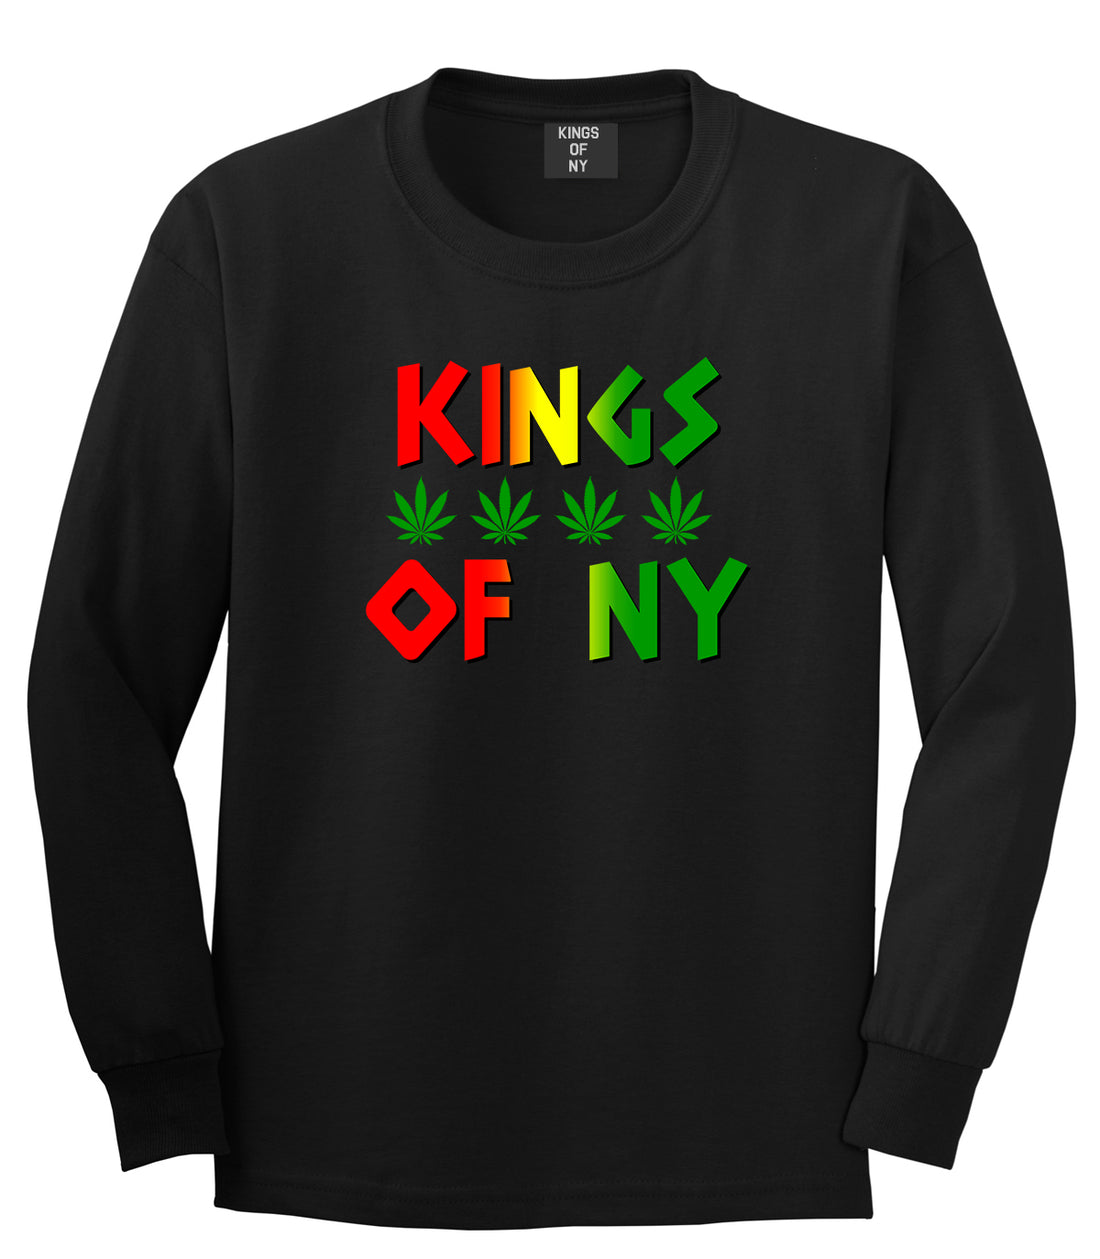 Puff Puff Pass Mens Long Sleeve T-Shirt Black by Kings Of NY